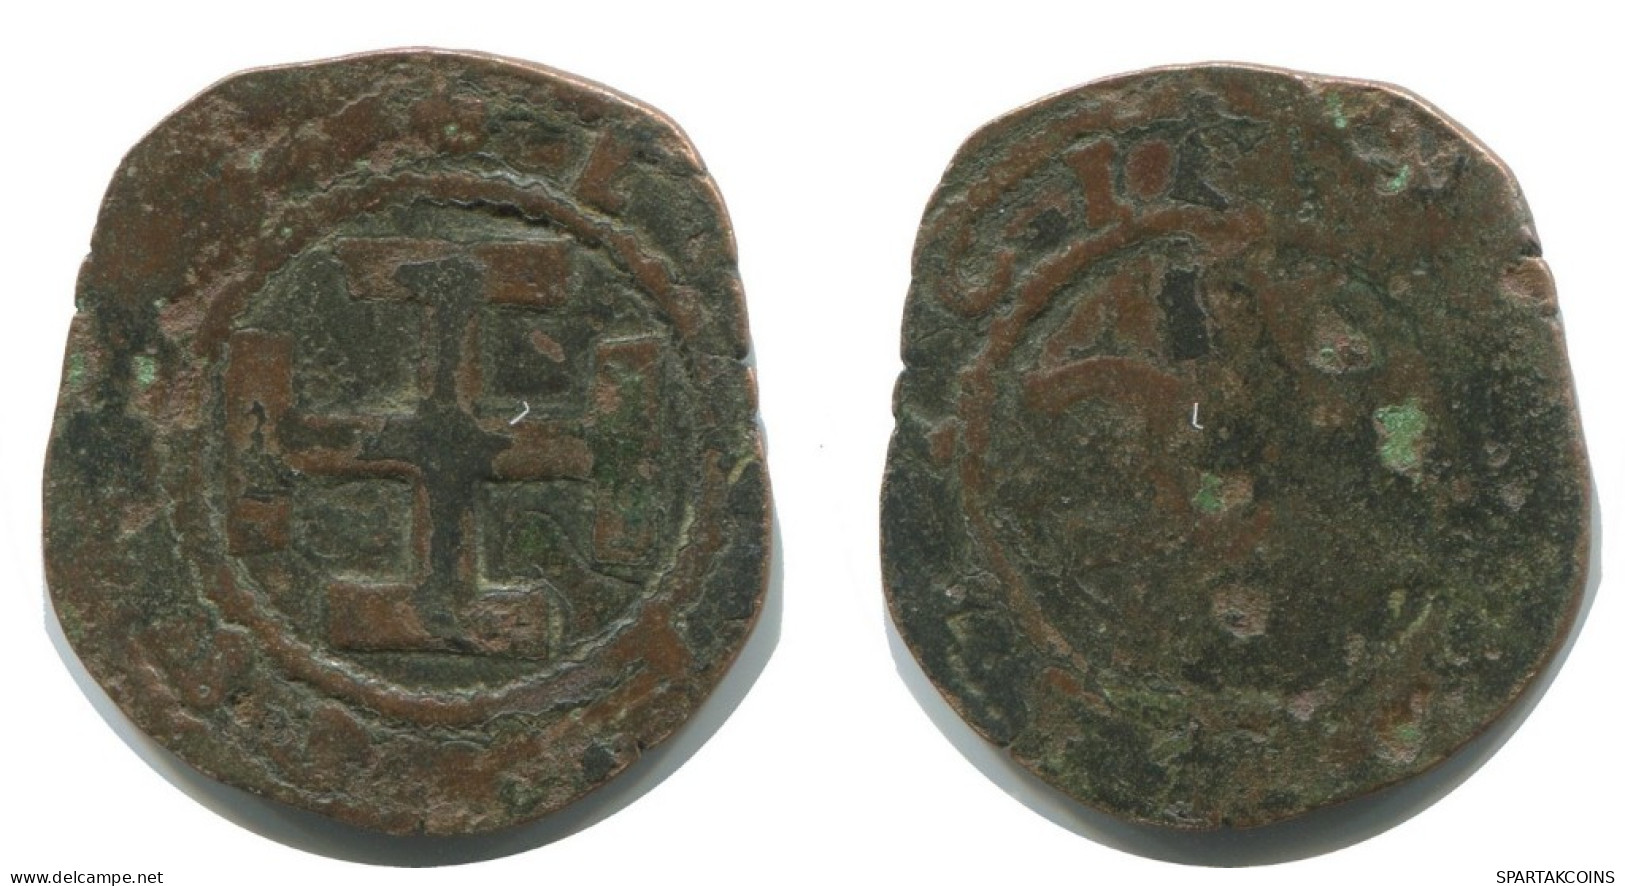 CRUSADER CROSS Authentic Original MEDIEVAL EUROPEAN Coin 1.7g/20mm #AC047.8.D.A - Other - Europe